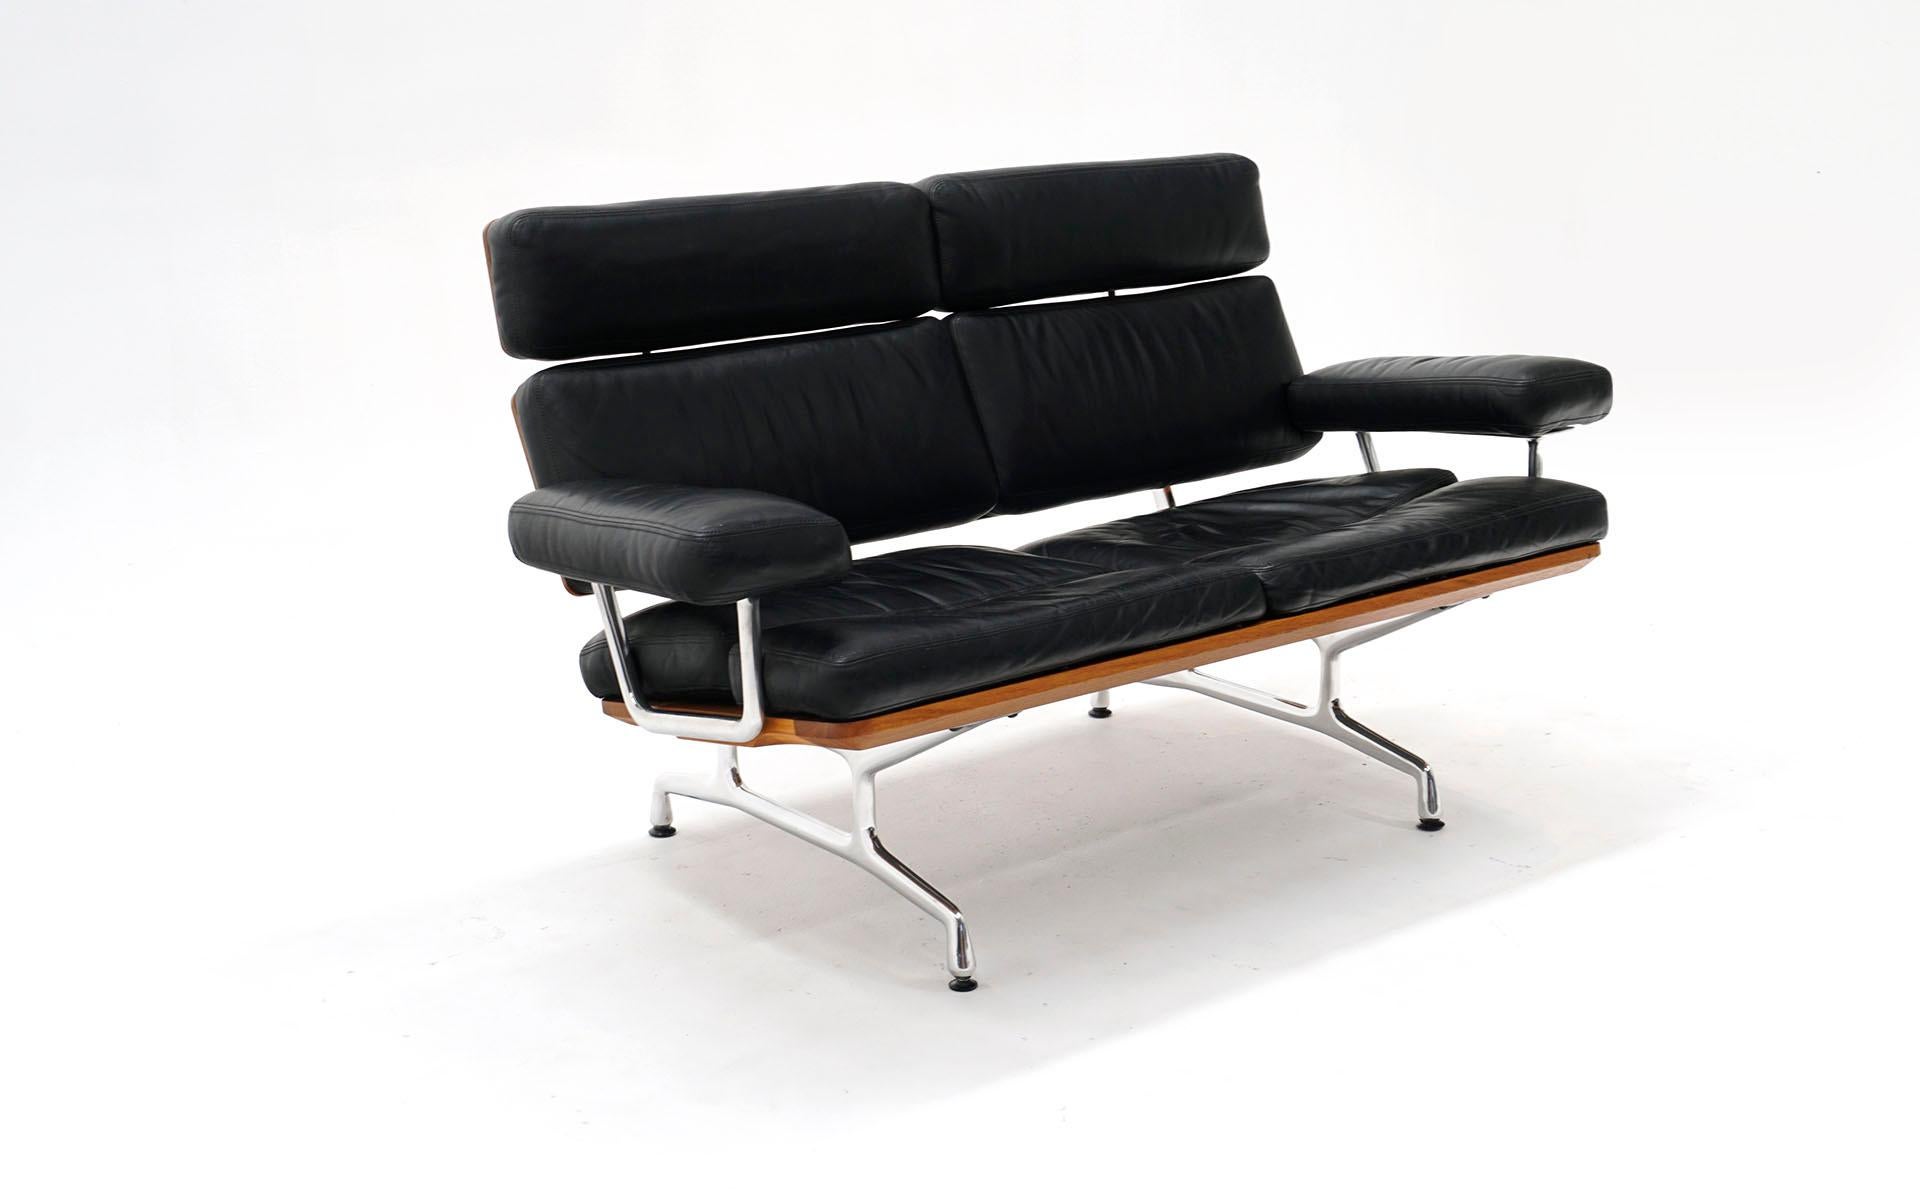 Eames two seat sofa loveseat for Herman Miller. Early production. Black Leather and solid walnut. The Eames sofa is the last piece of furniture produced by the Eames Office, which completed the design after Charles Eames died in 1978. It went into